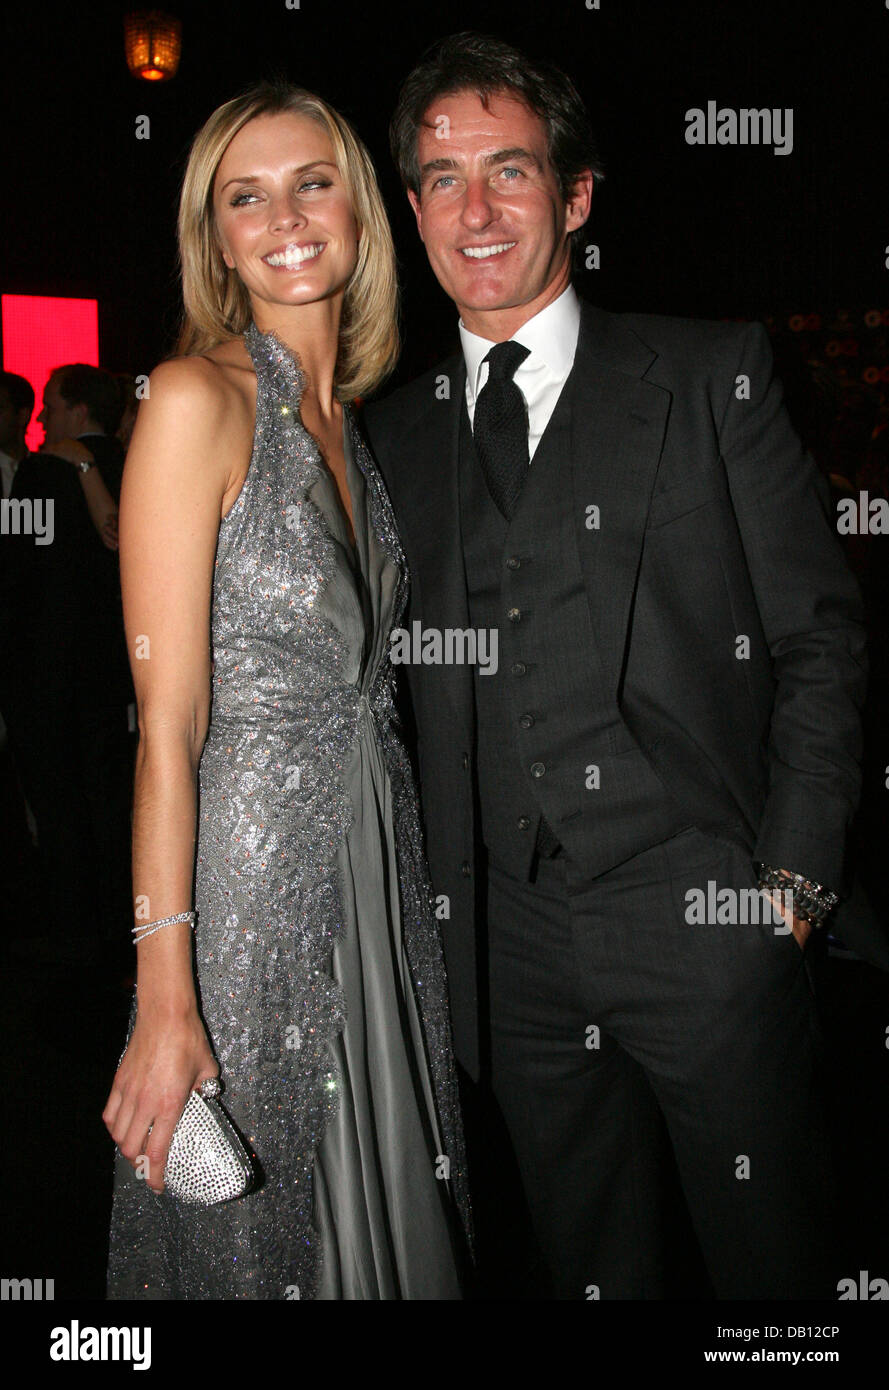 Fortune heir Tim Jefferies and his girlfriend, Malin Johansson, pose during the gala event for the presentation the ?Men of the Year 2007? prizes in Munich, Germany, 25 October